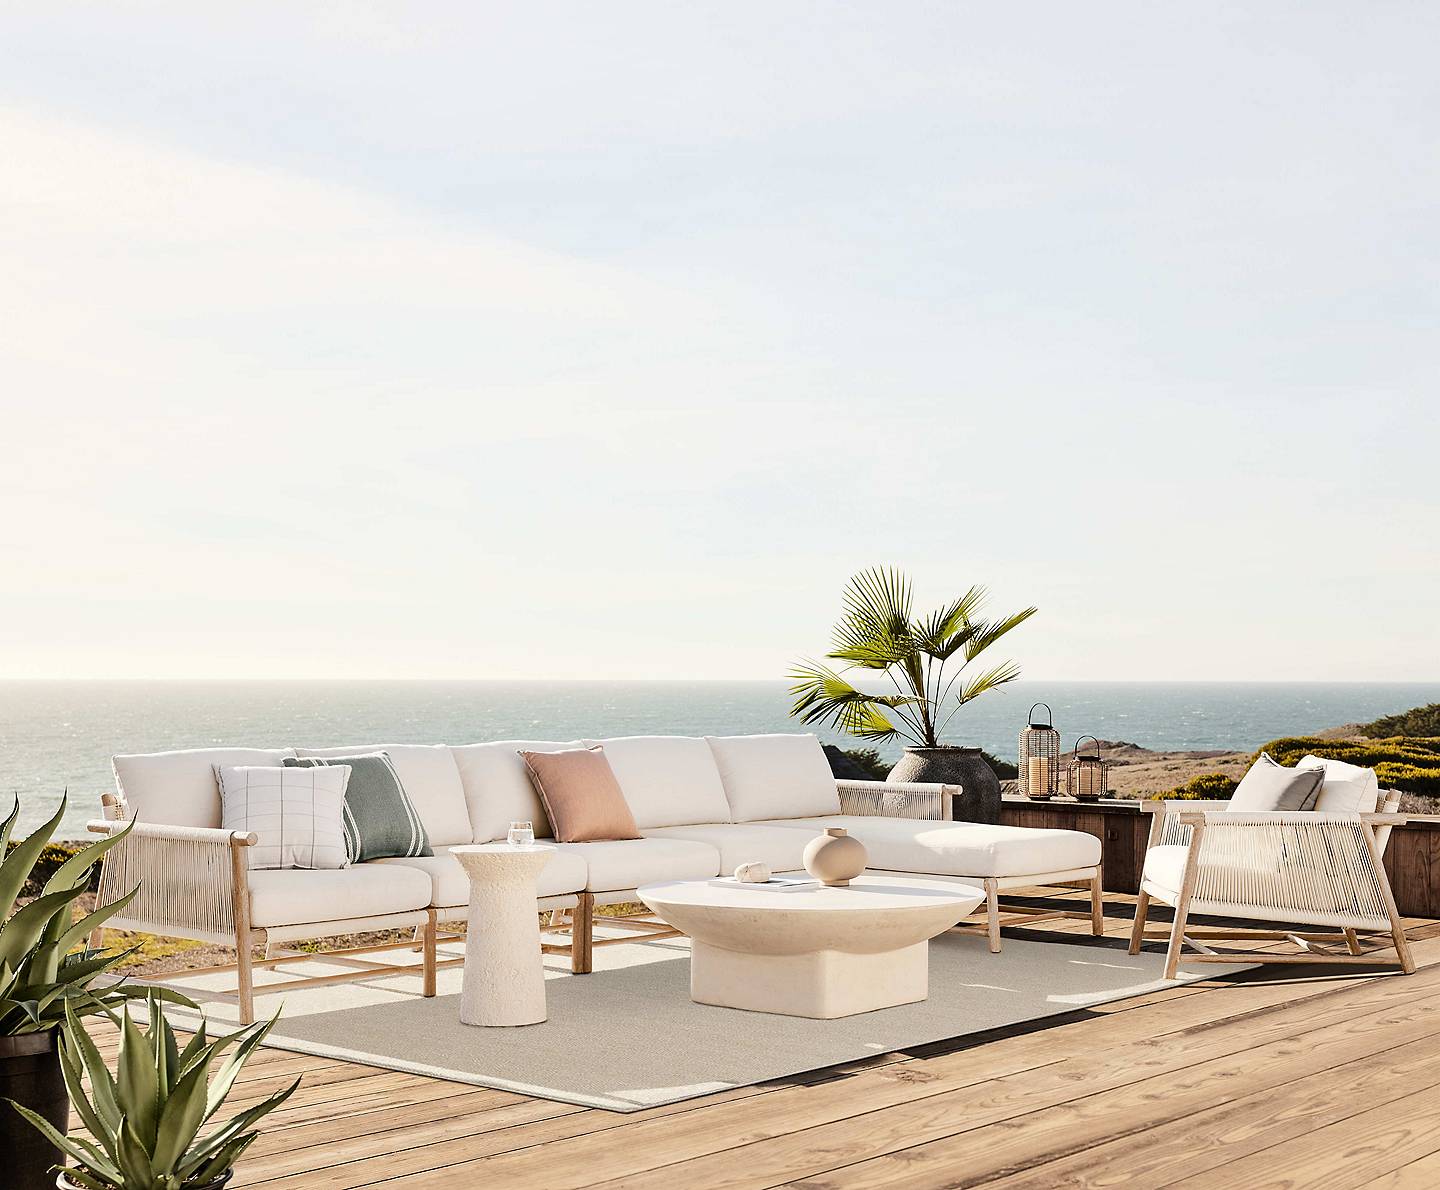 How to Care for Outdoor Furniture: A Complete Guide